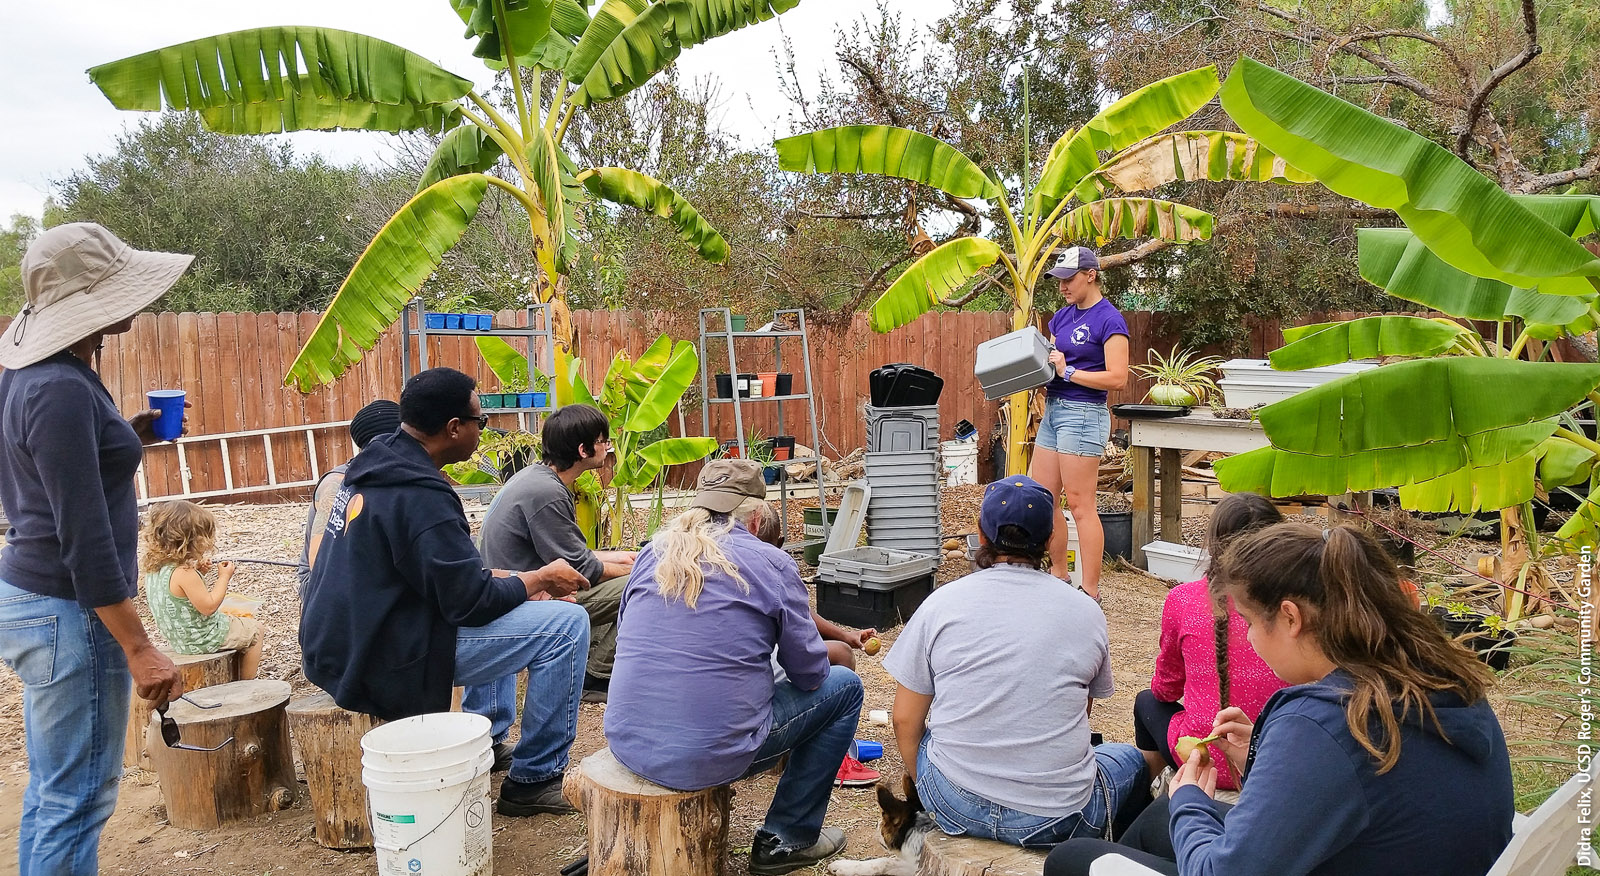 Maddy Luthard from UCSD Roger's Community Garden leads a worm composting workshop at Ocean View Growing Grounds, in San Diego. In addition to being a source of food, community gardens can provide sites for community organizing and educational programs.